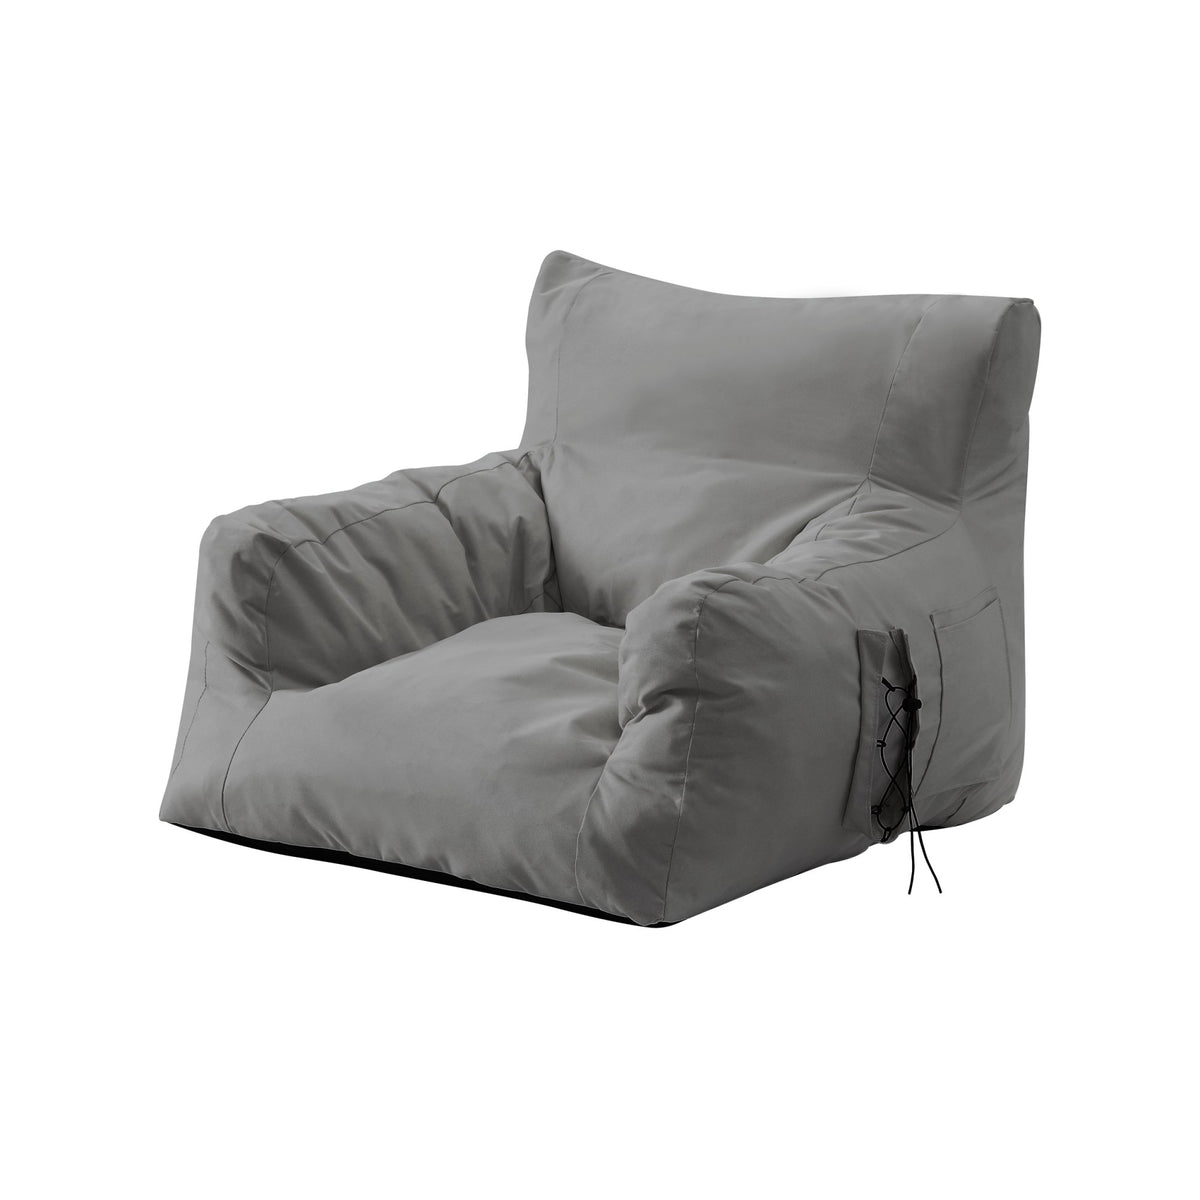 Comfort and Support: Memory Foam Chairs